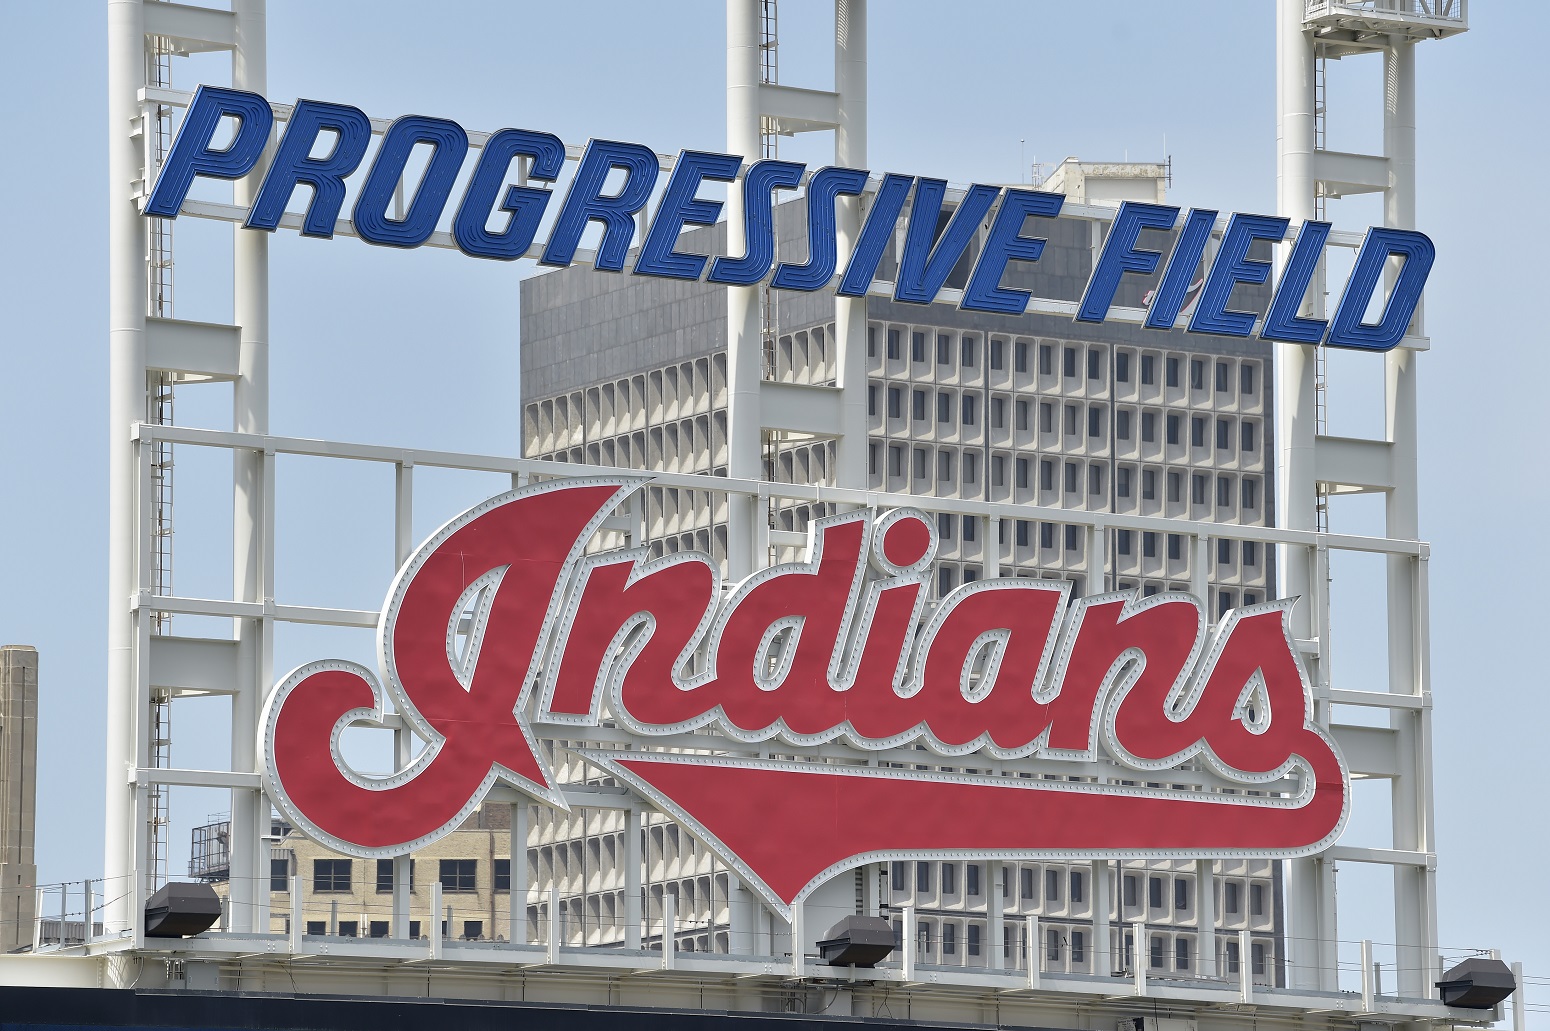 The Cleveland Indians Are Following the Washington Football Team’s Footsteps After 105 Years